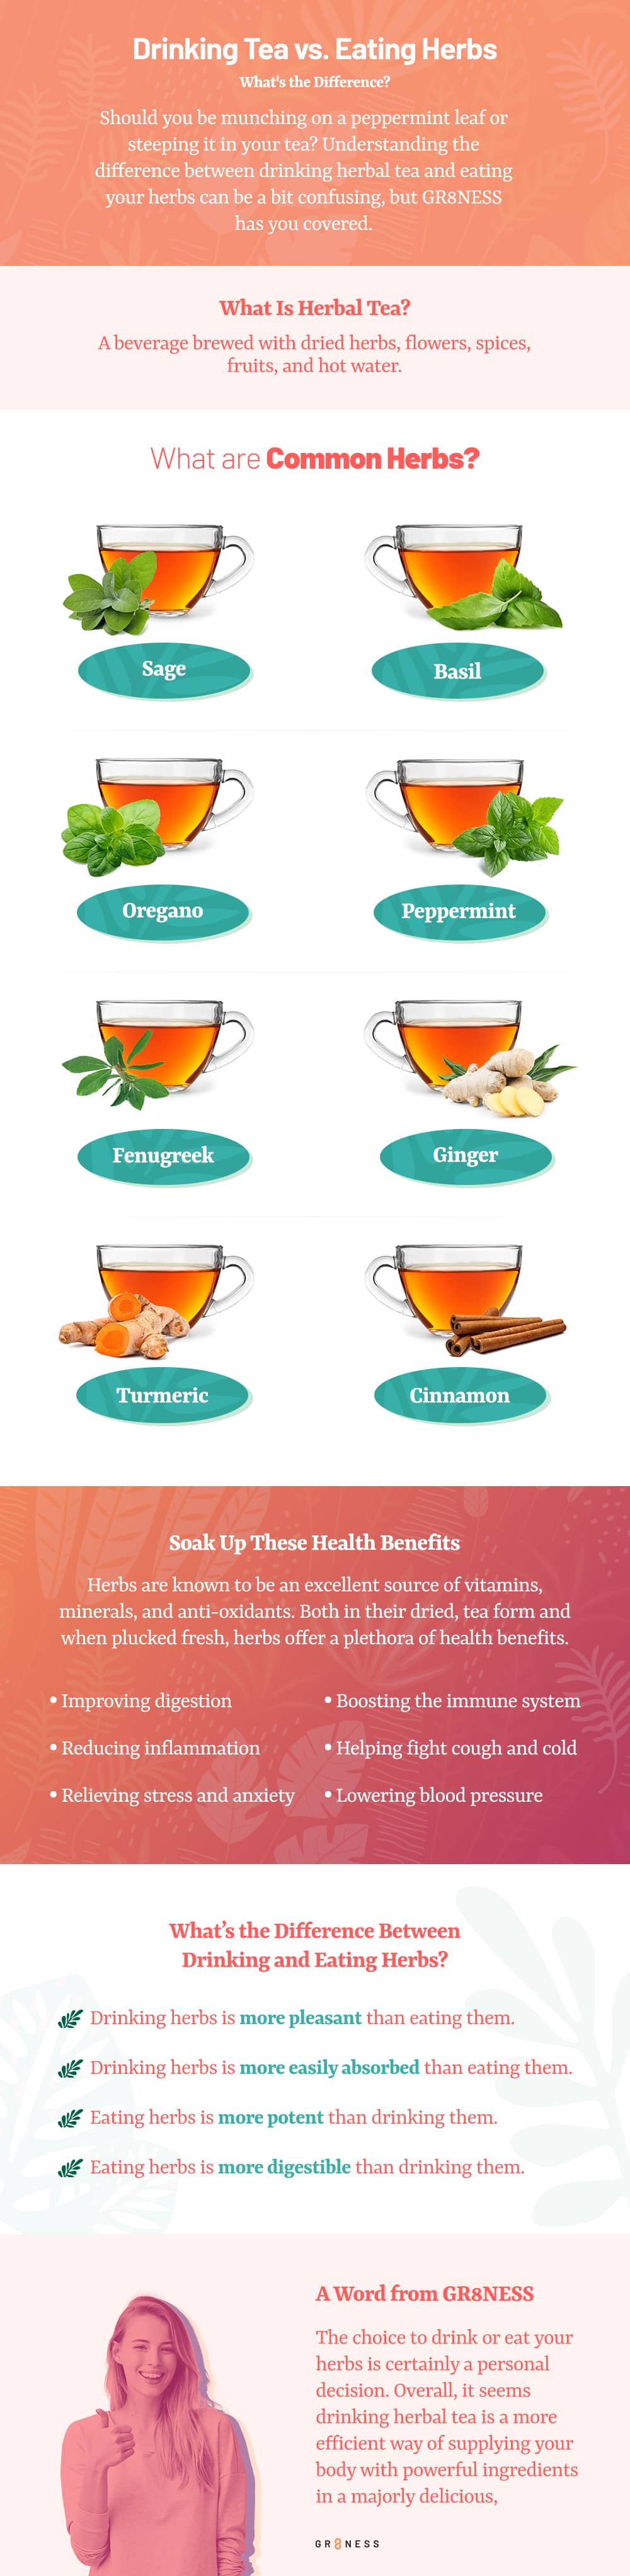 Infographic describing the difference between drinking tea and eating herbs